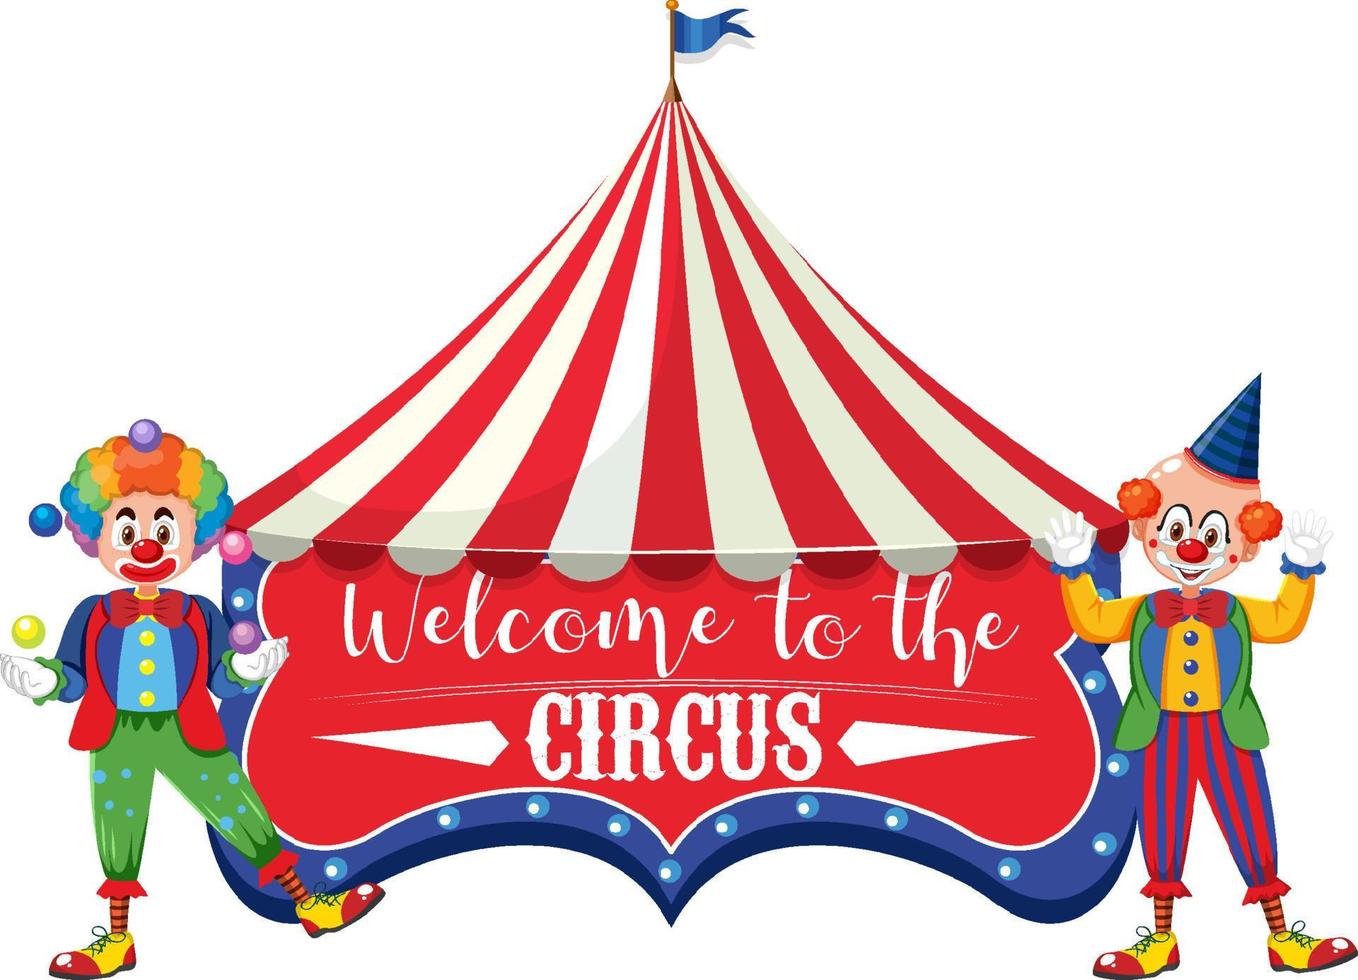 Welcome to the circus banner with clown performance vector